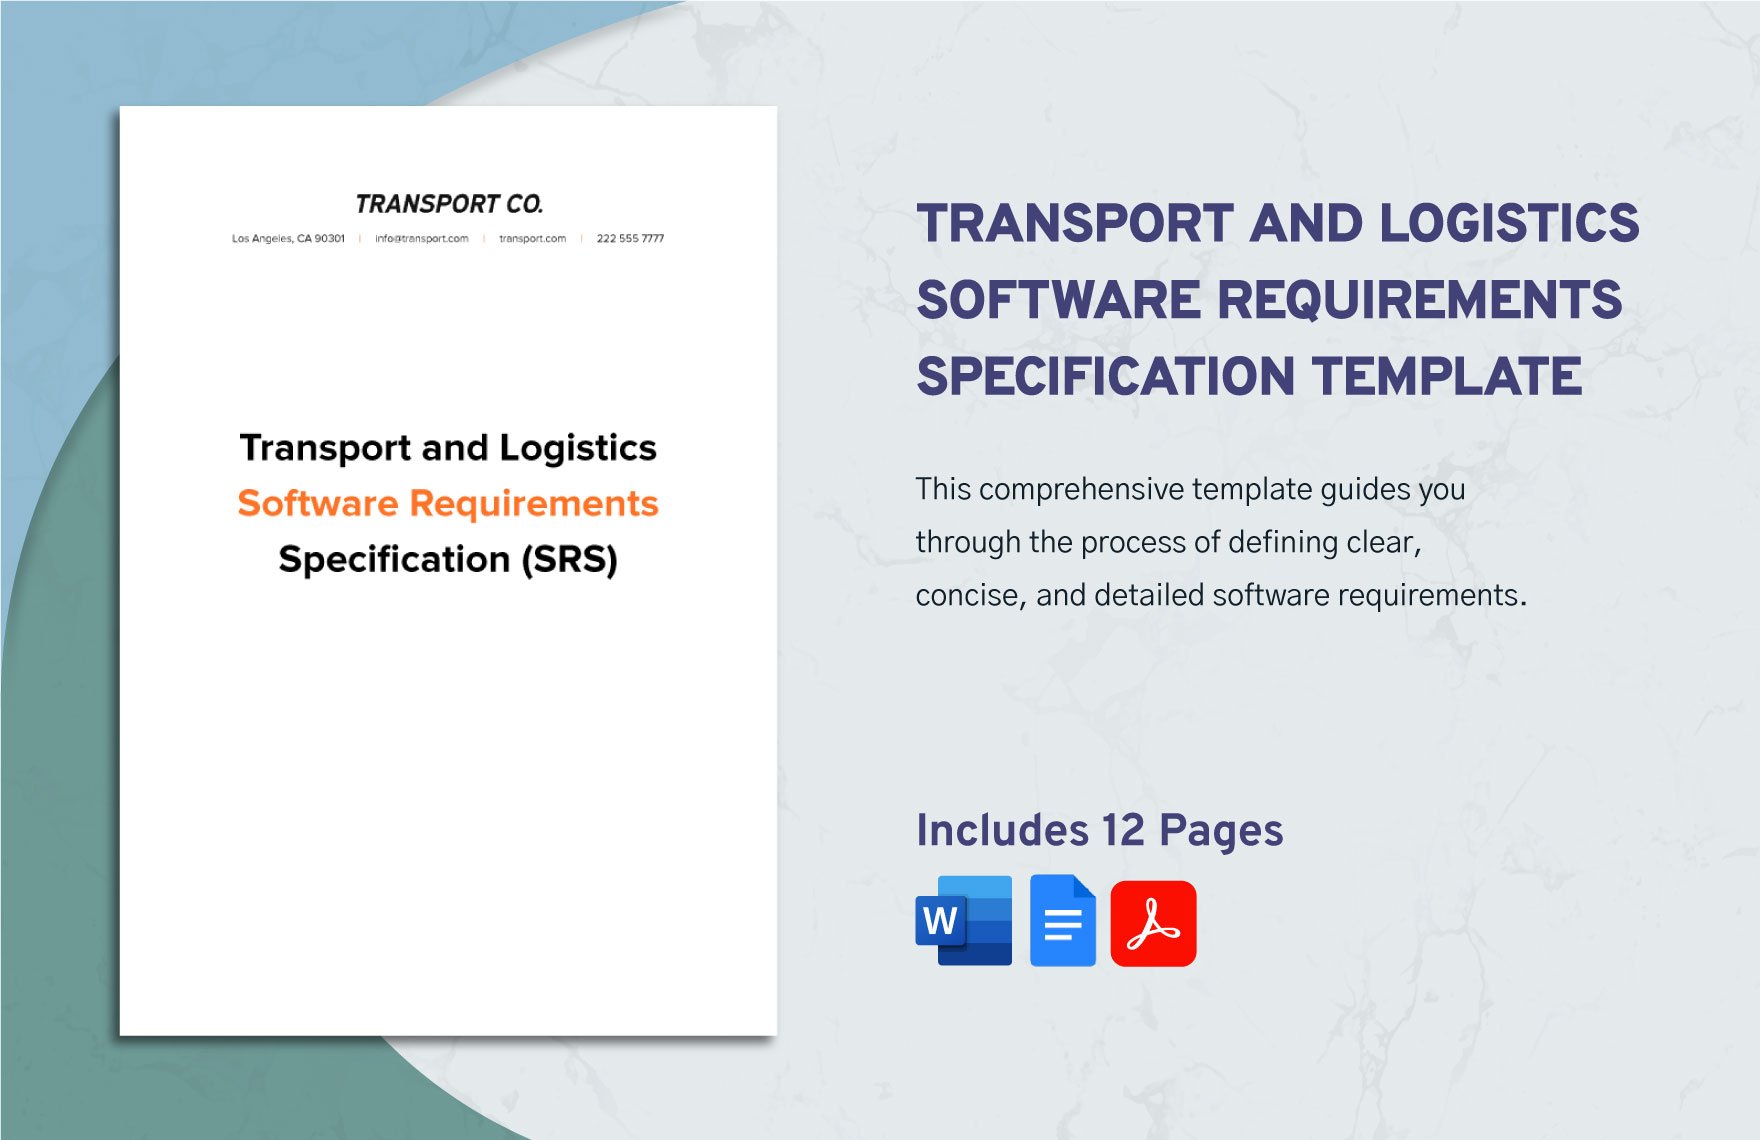 Transport and Logistics Software Requirements Specification (SRS) Template